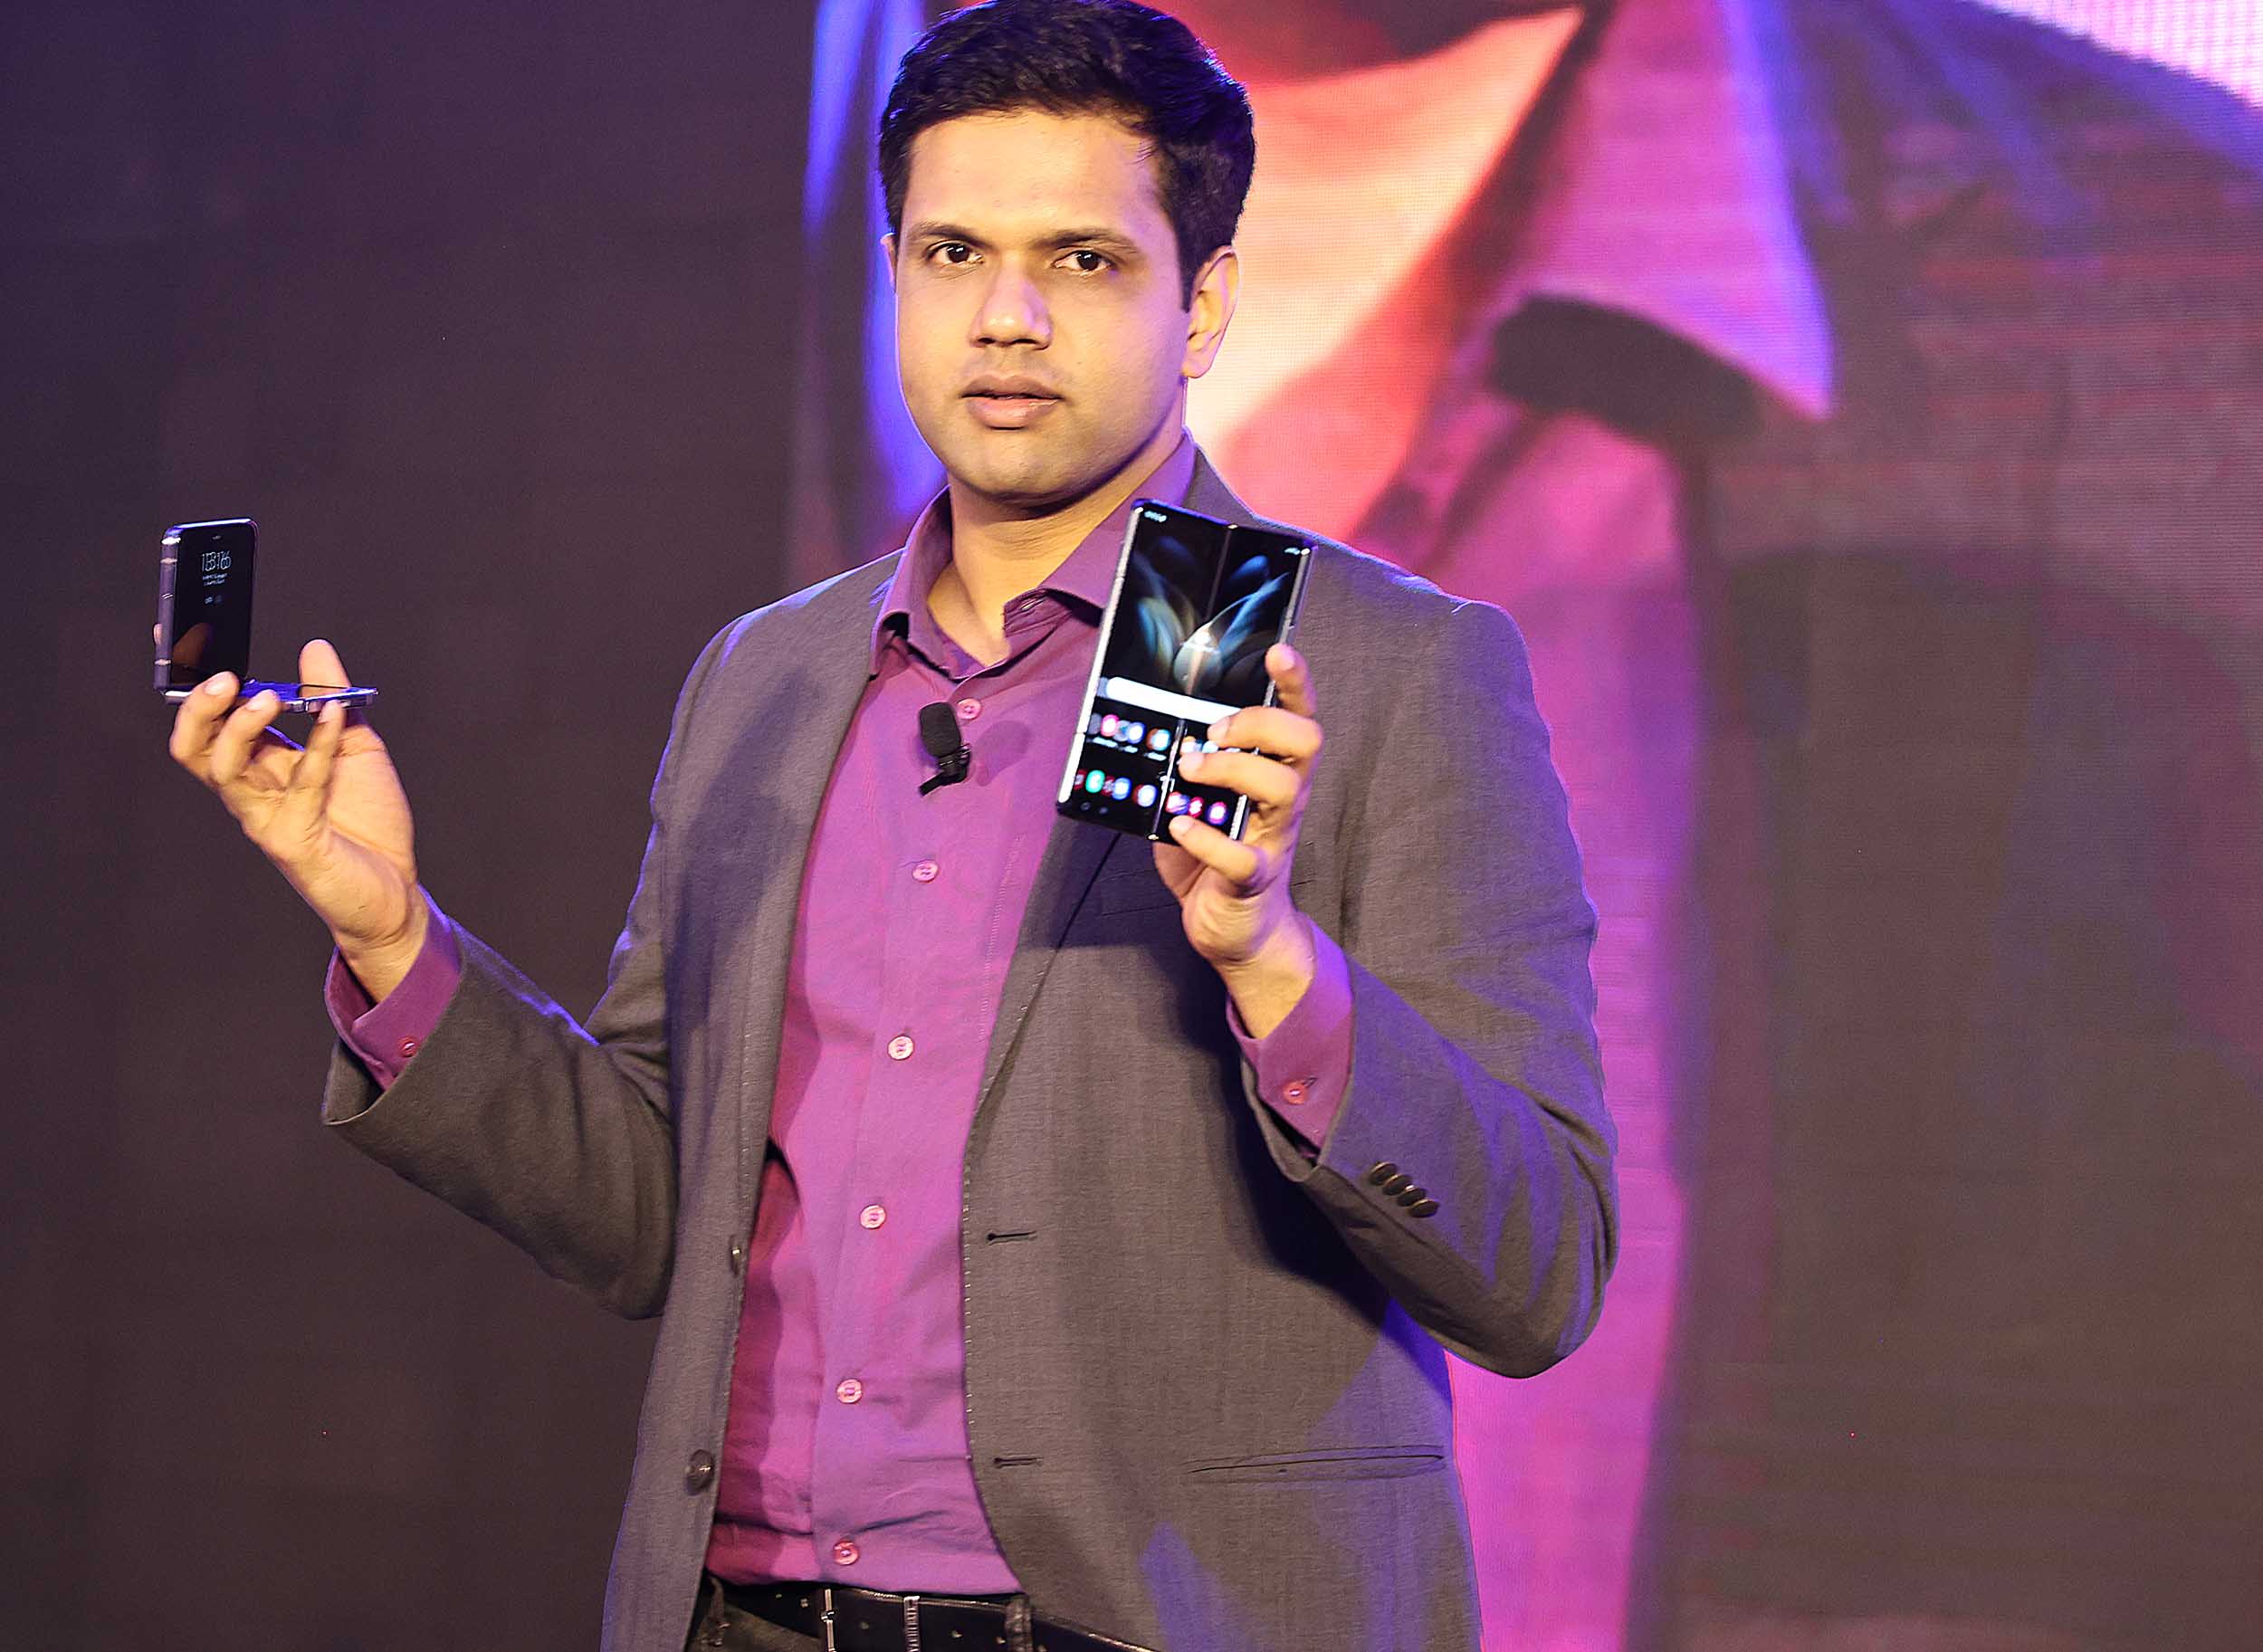 Samsung launched Galaxy Z Flip 4 and Galaxy Z Fold 4 in India